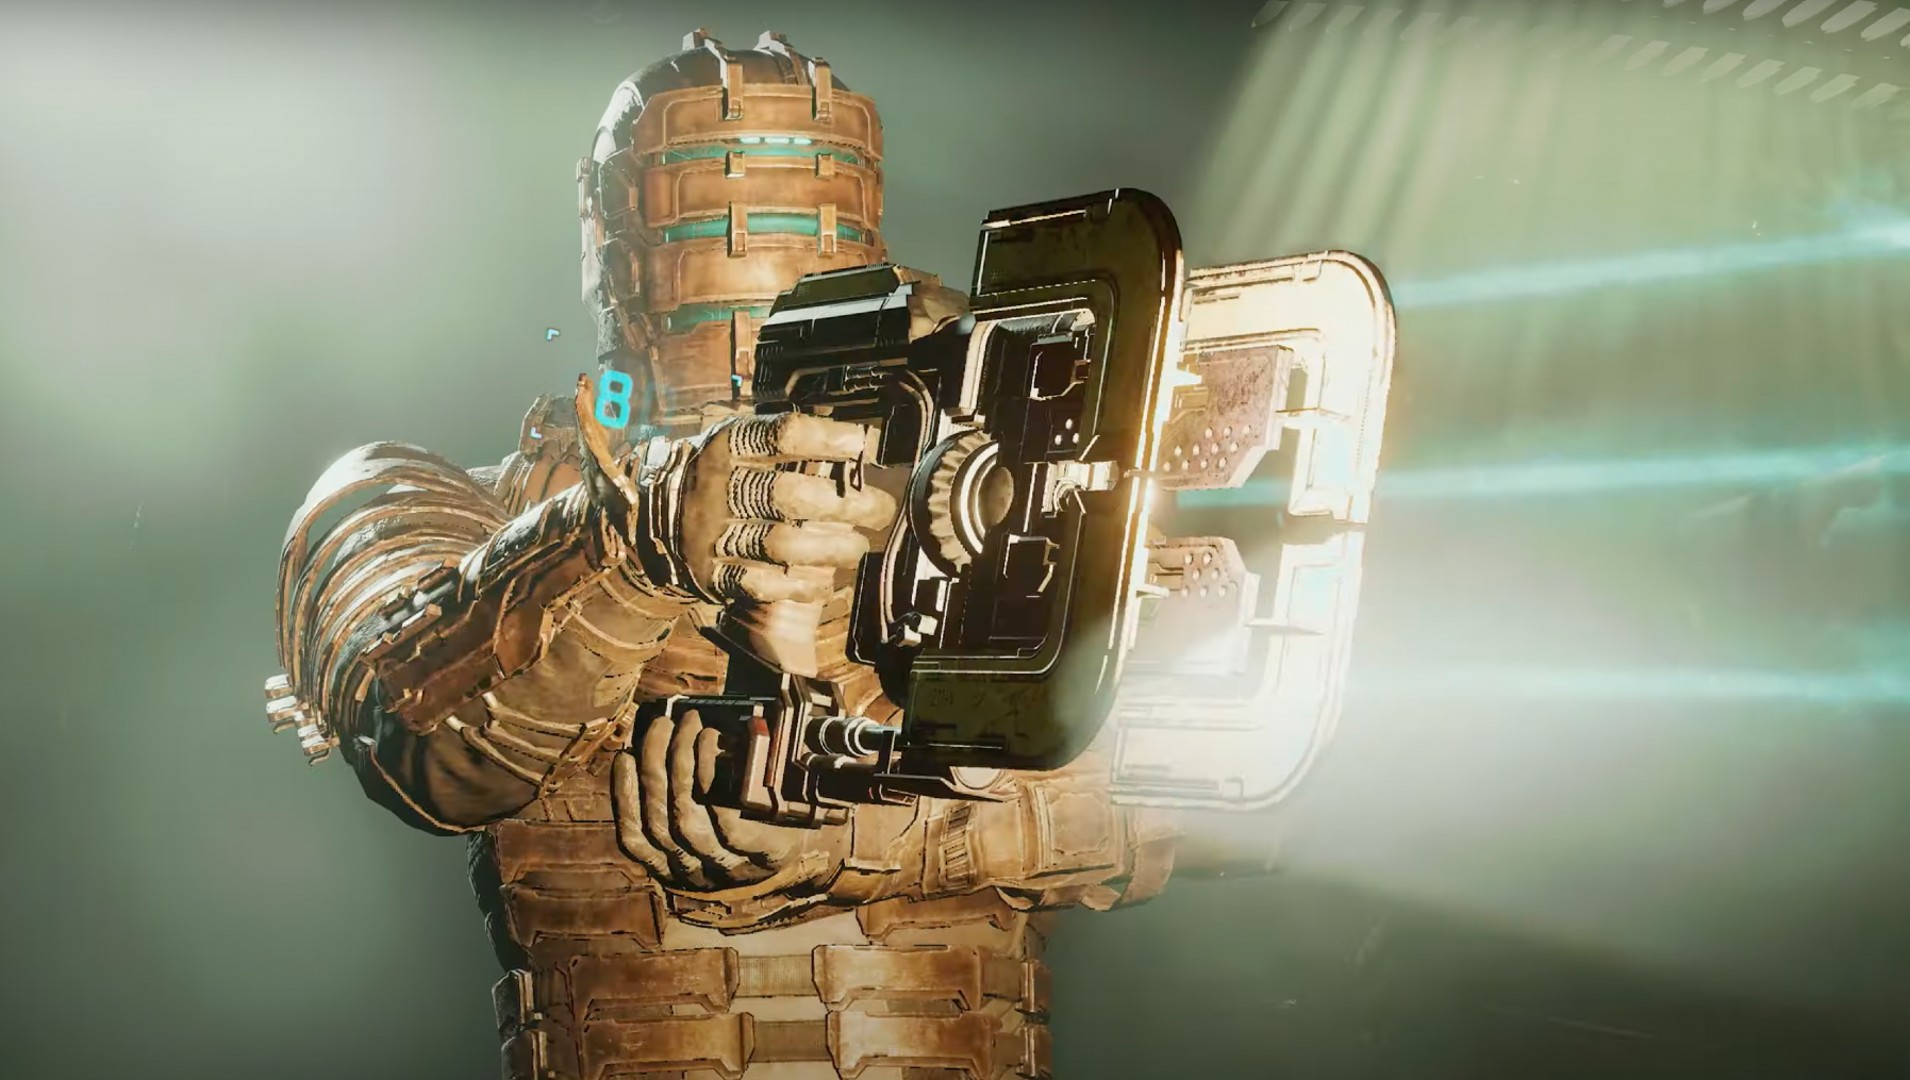 Here's our first look at Dead Space remake's gameplay